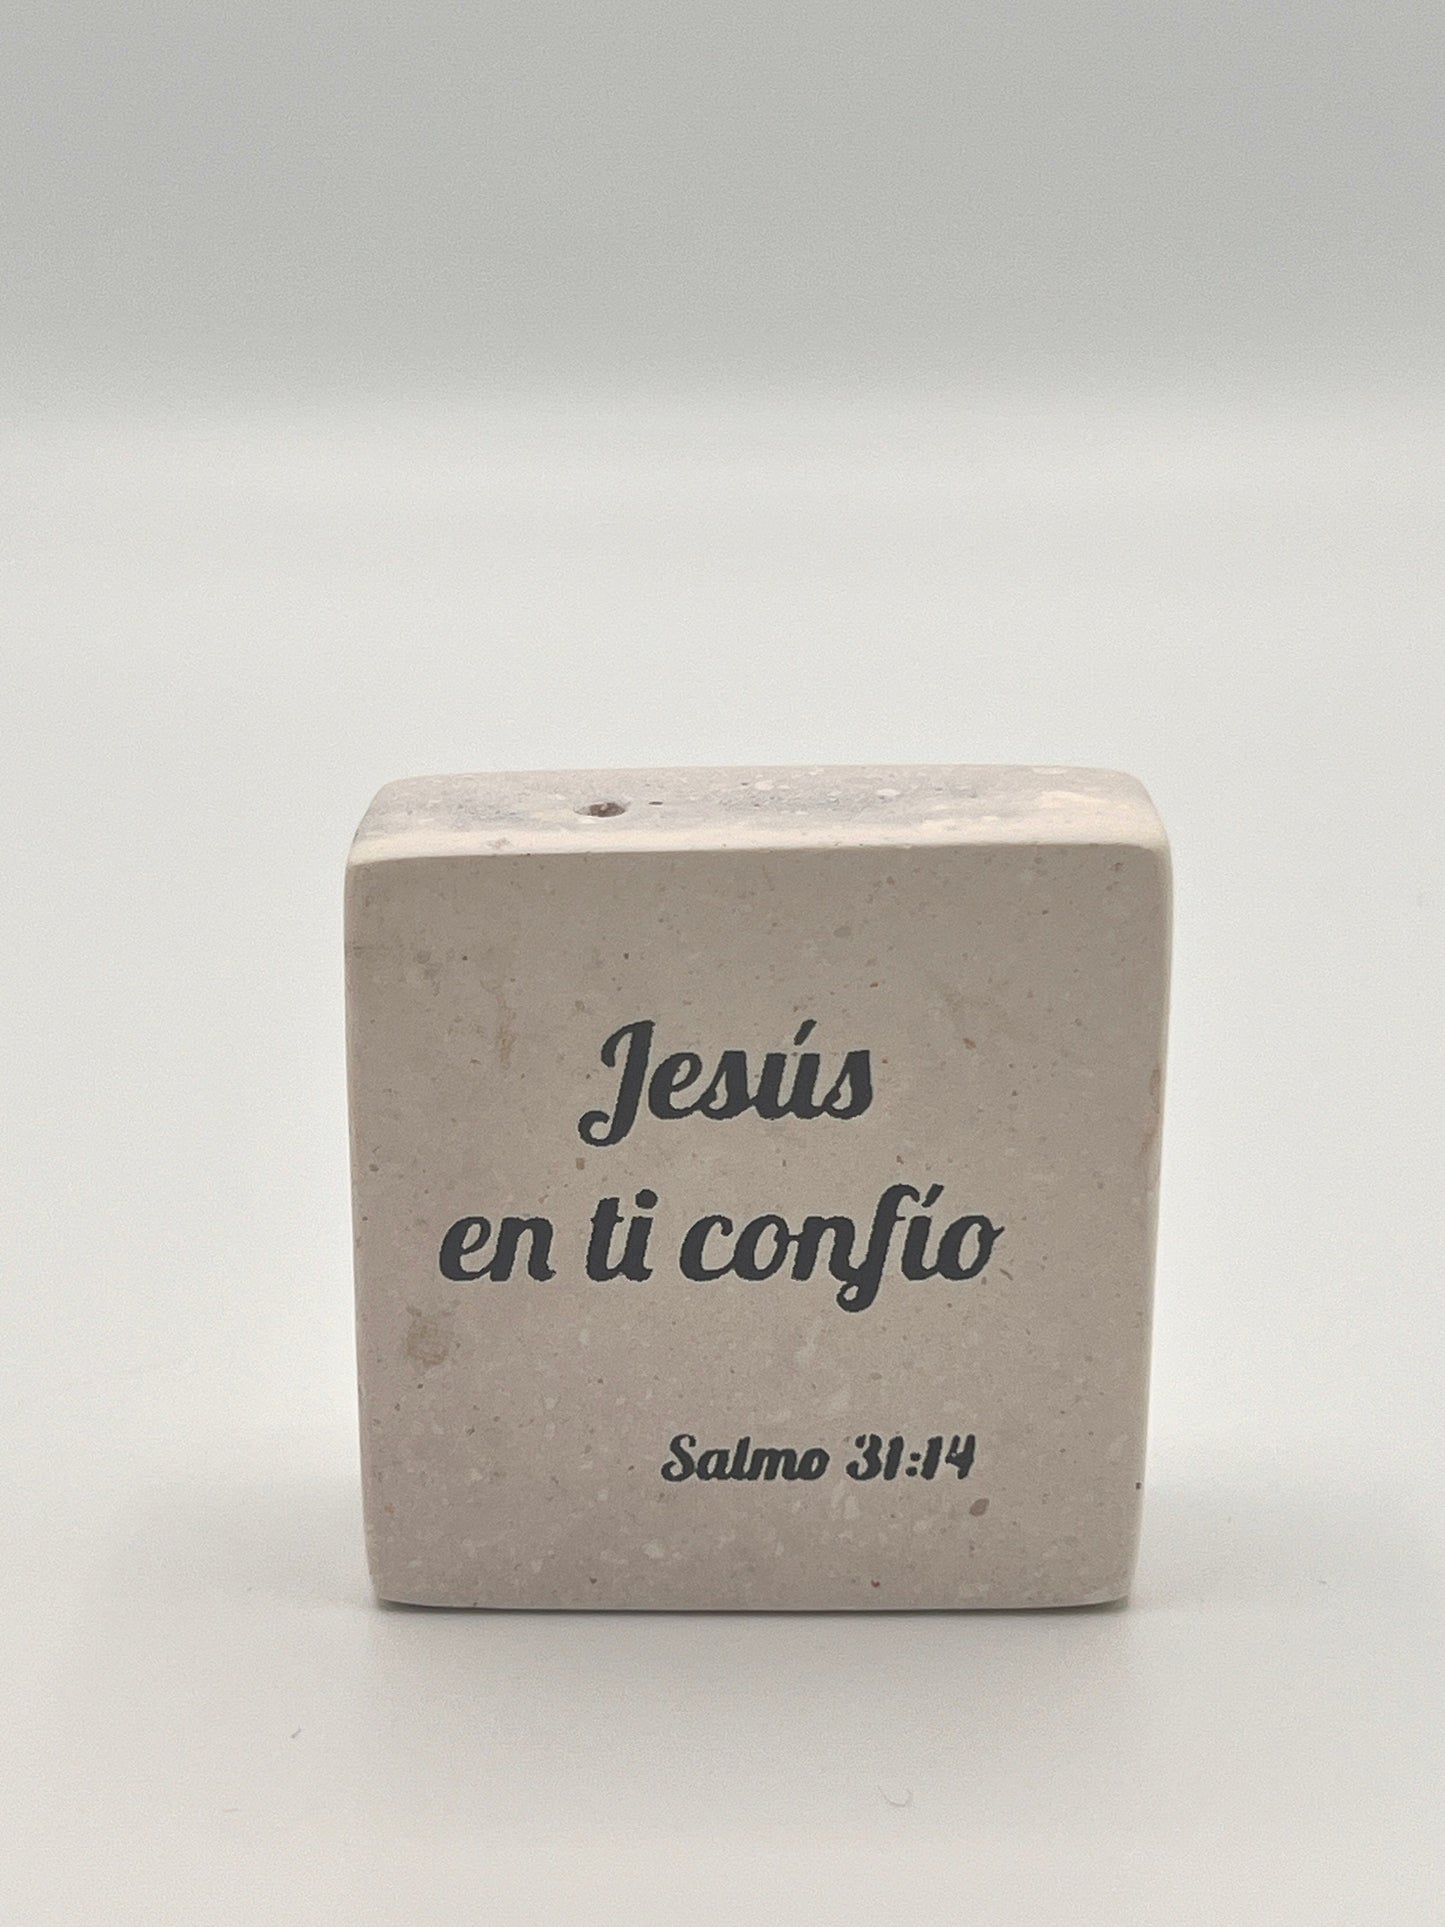 Hand-Carved Soapstone Scripture 2" by 2" - Bible Verse Salmos 31:14 - Español